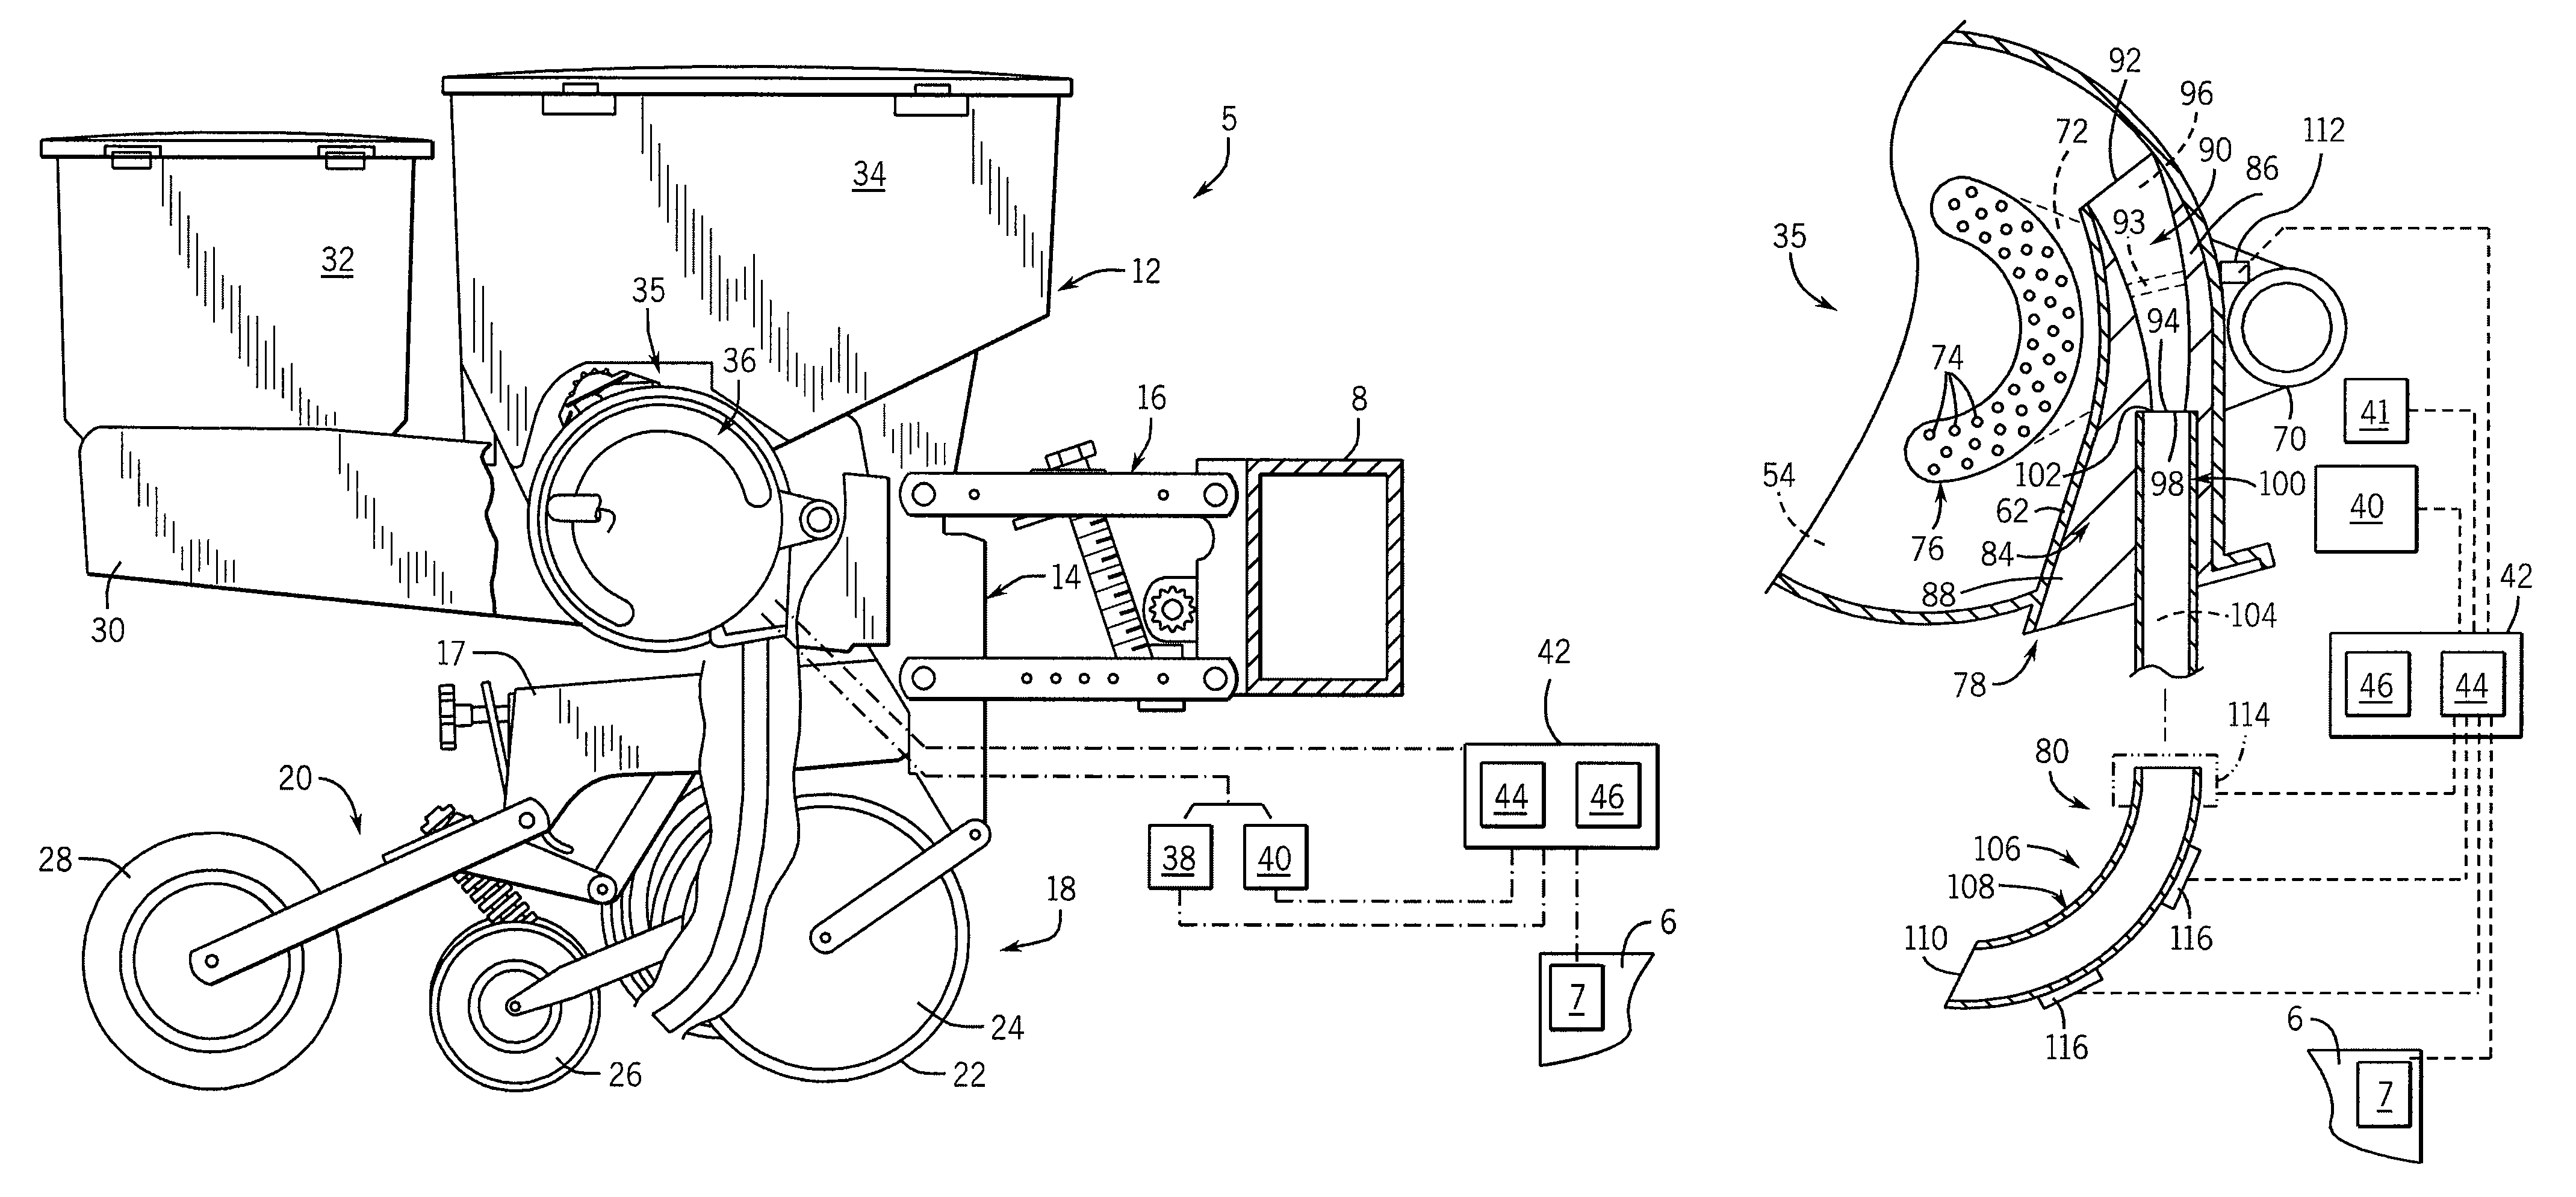 Seed delivery system